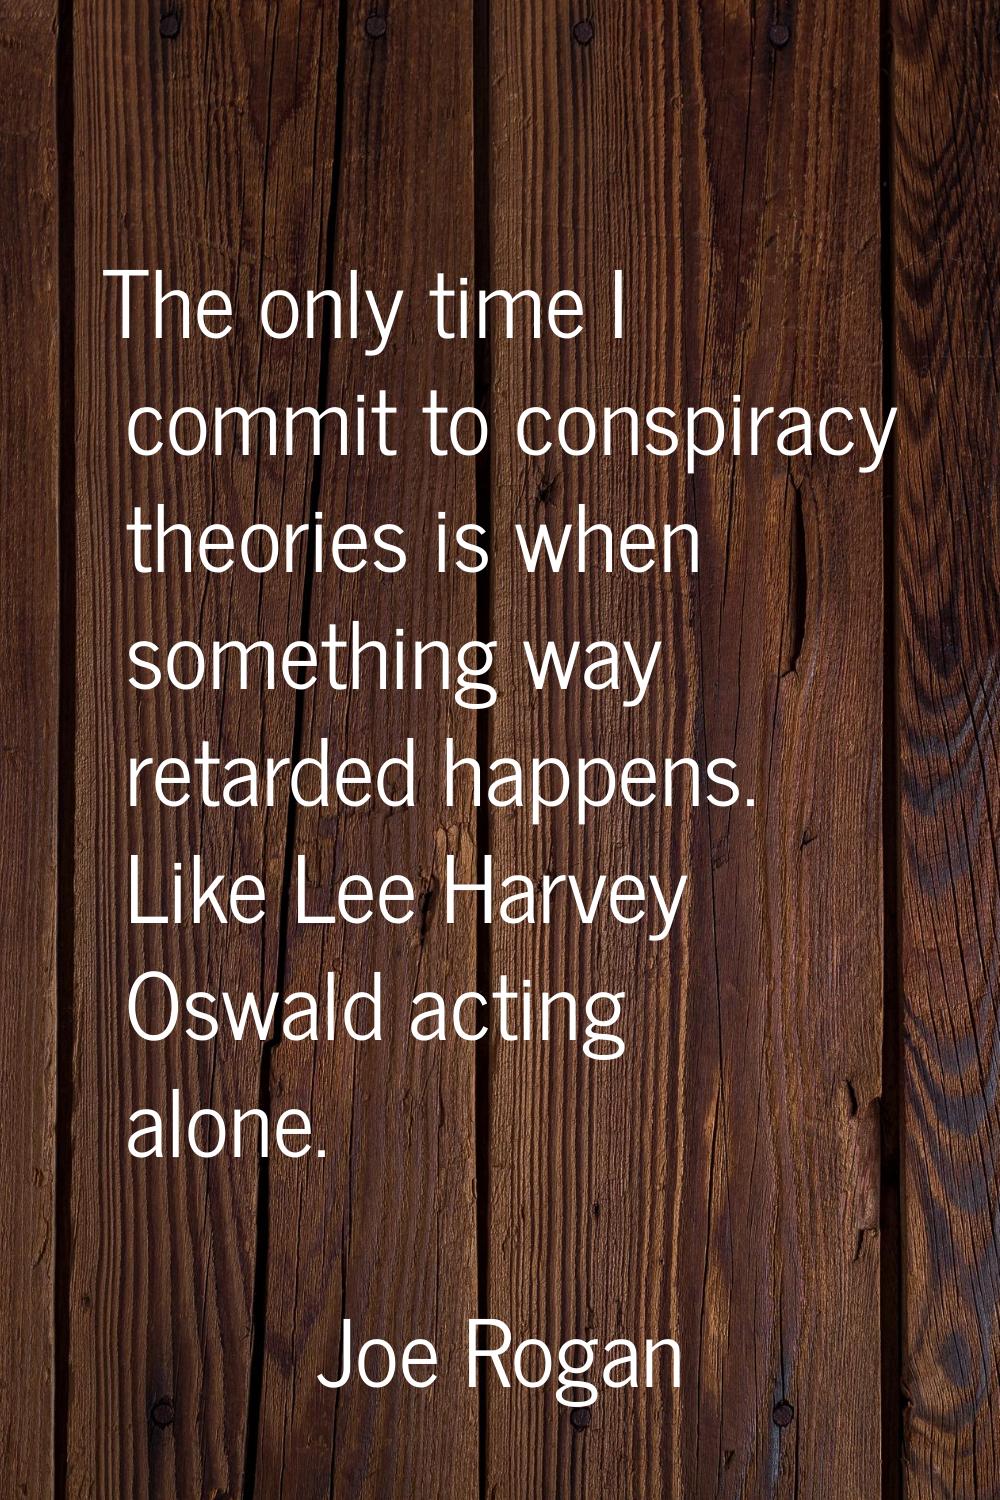 The only time I commit to conspiracy theories is when something way retarded happens. Like Lee Harv